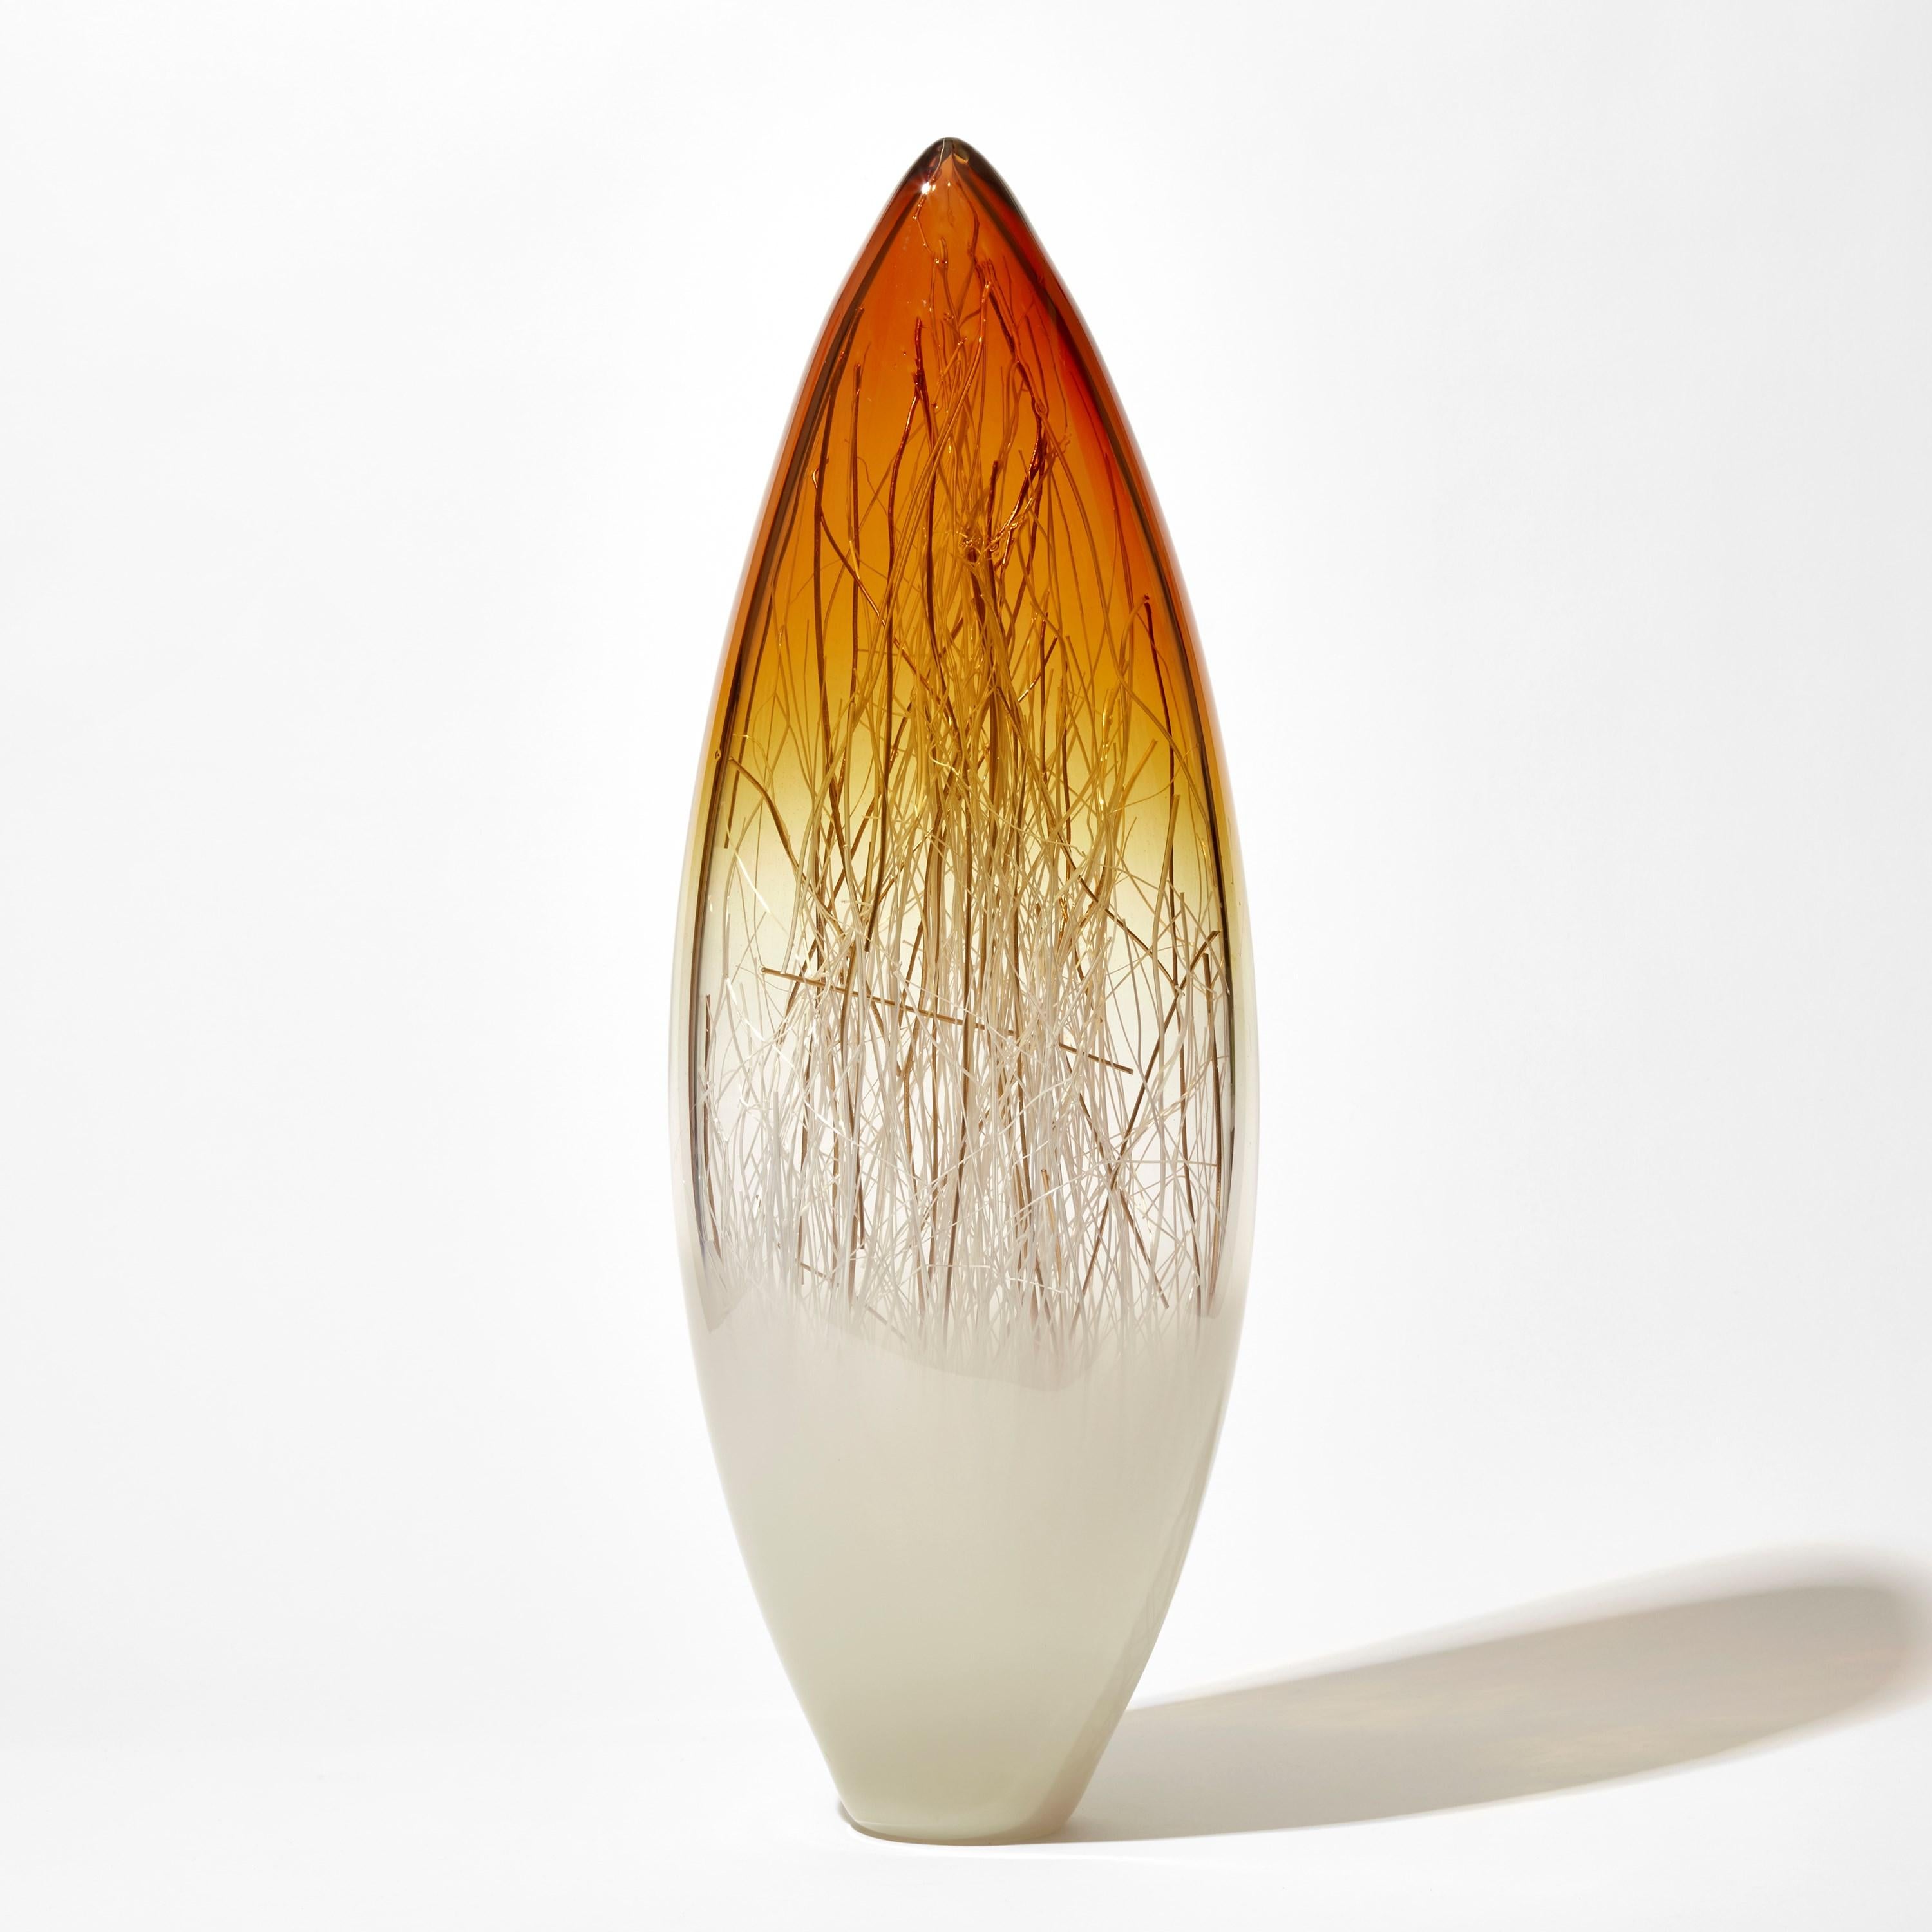 Organic Modern Ore in Amber & Ecru with Gold, a Glass Sculpture by Enemark & Thompson For Sale